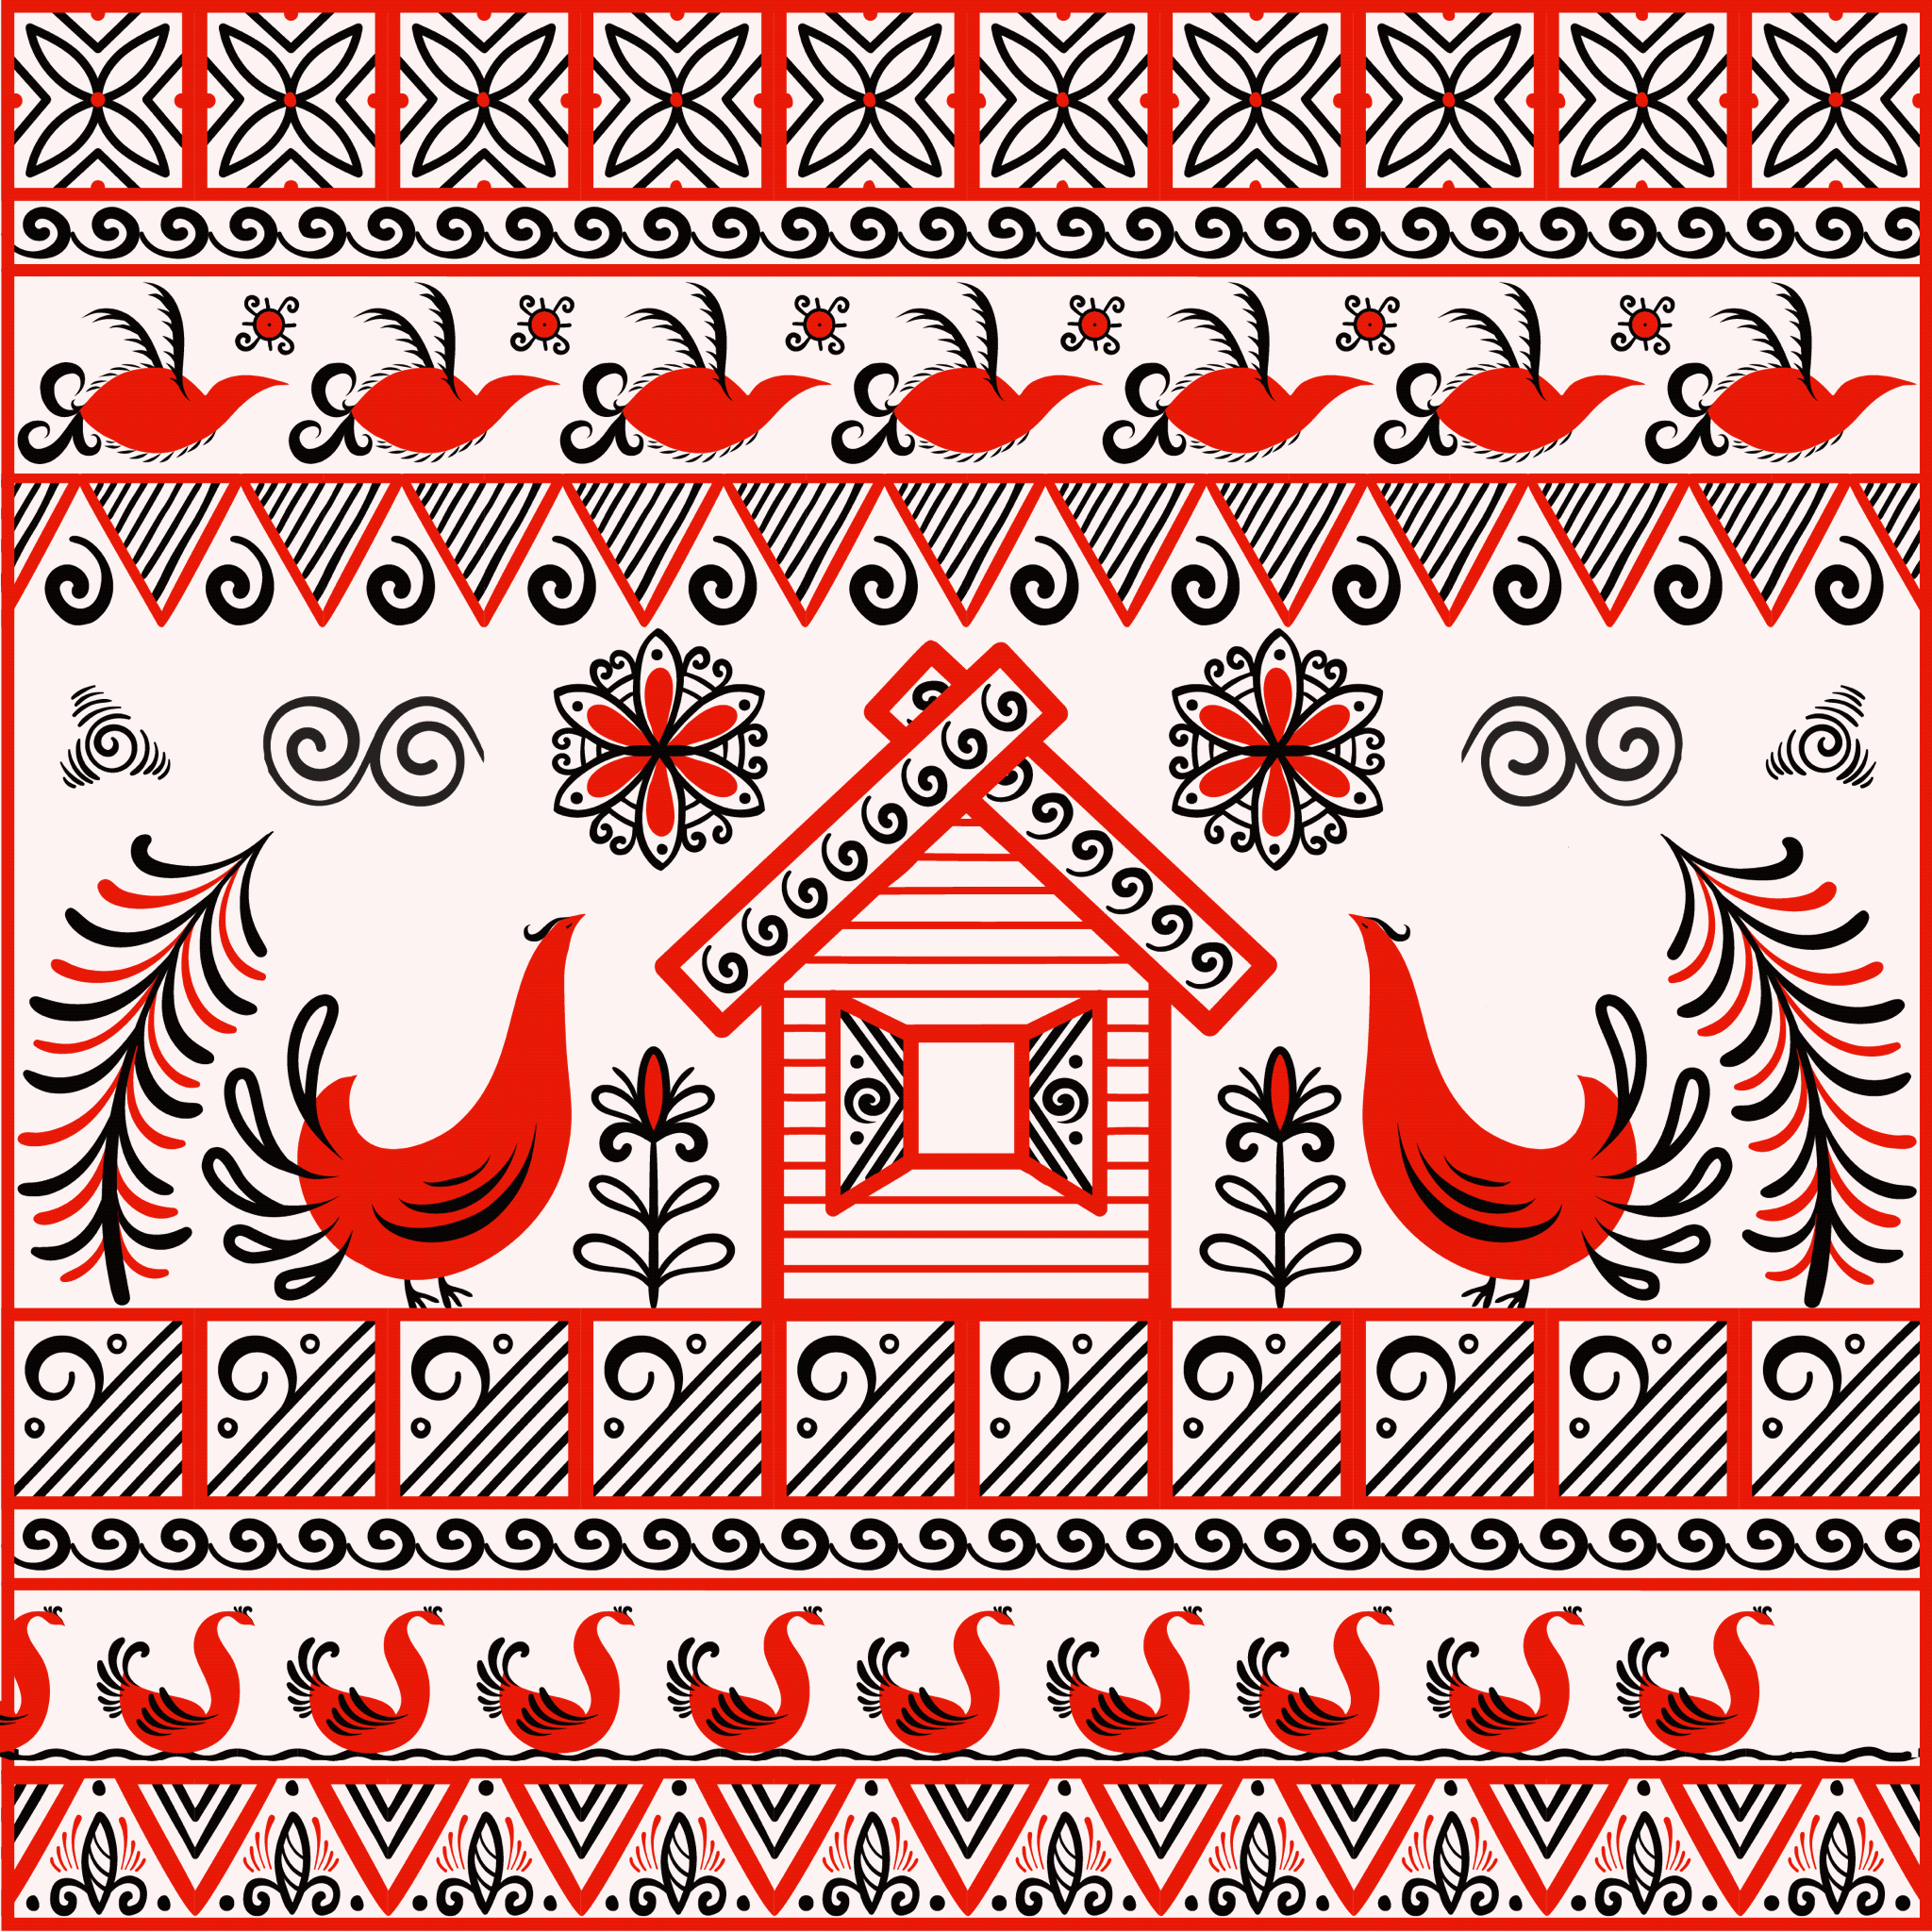 Birds in the style of Mezen painting. mezen painting ornament russian style seamless pattern textile design